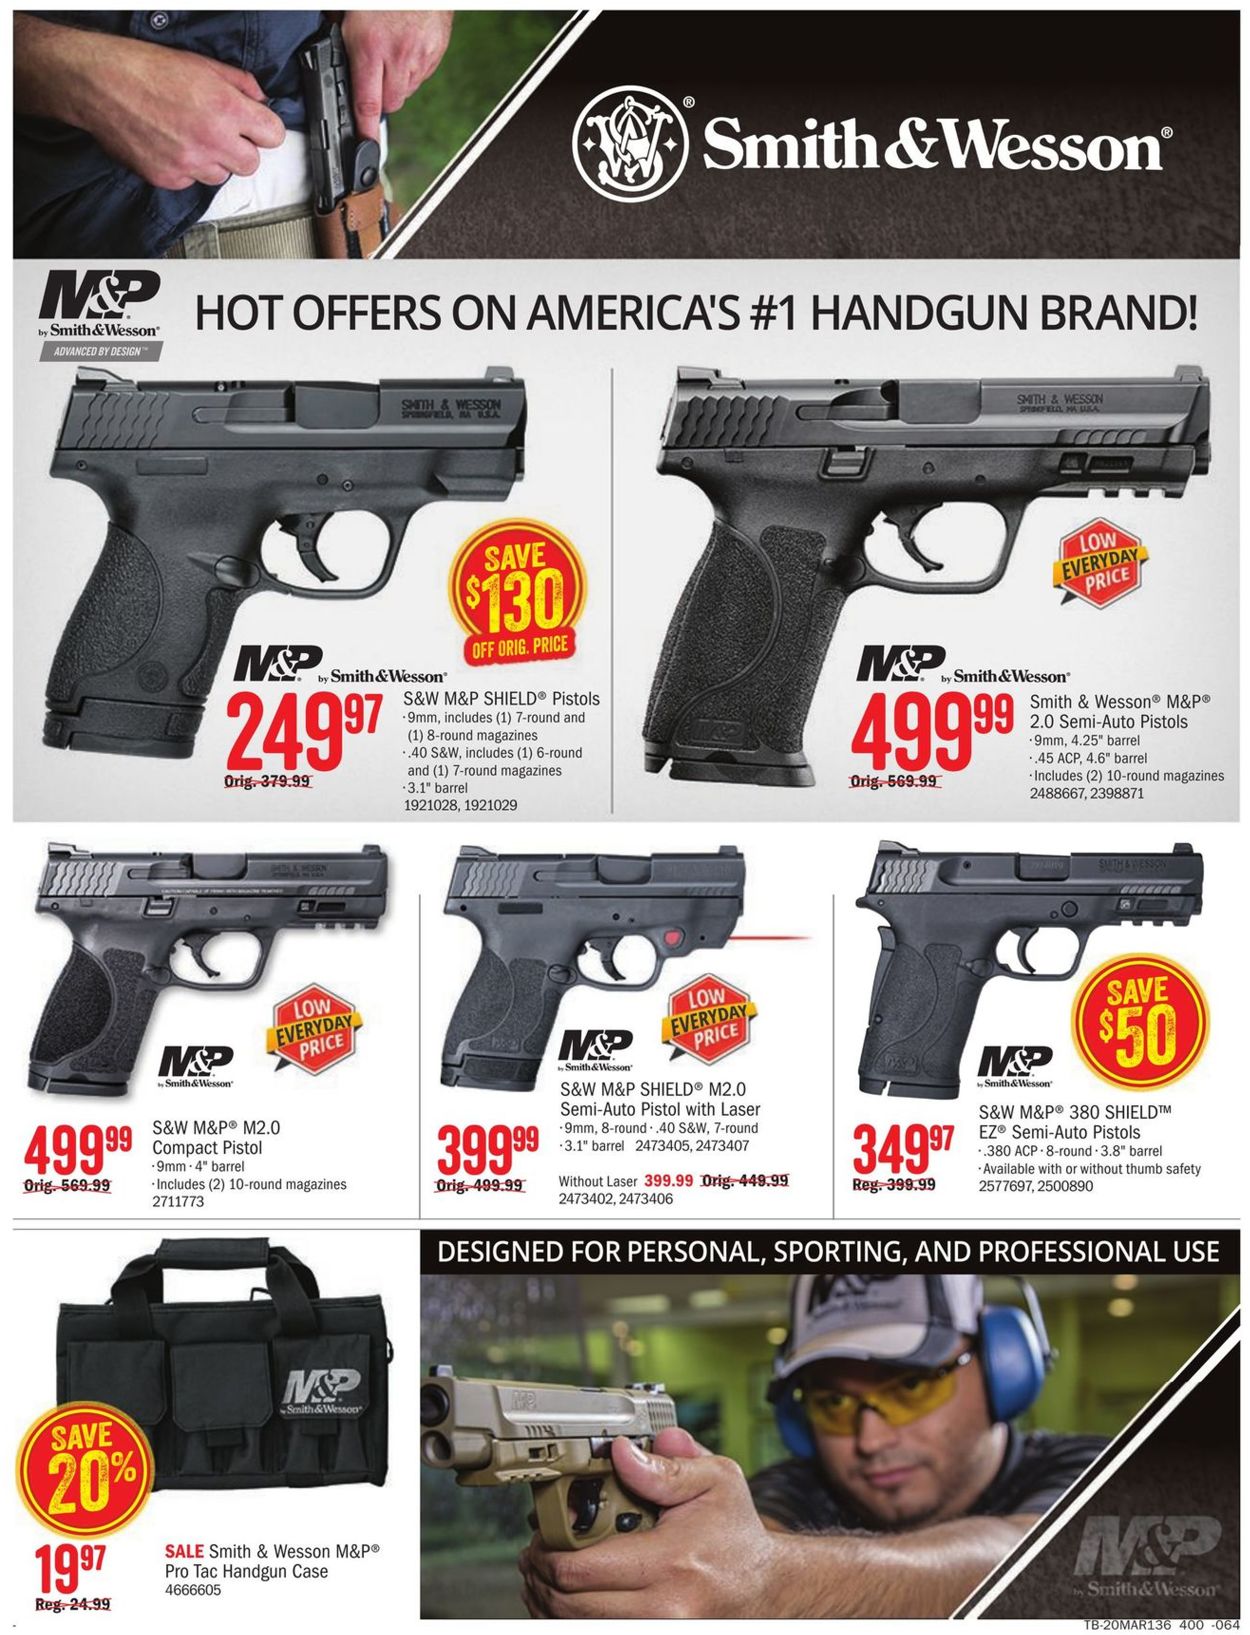 Cabela's Current weekly ad 02/27 - 03/11/2020 [14] - frequent-ads.com